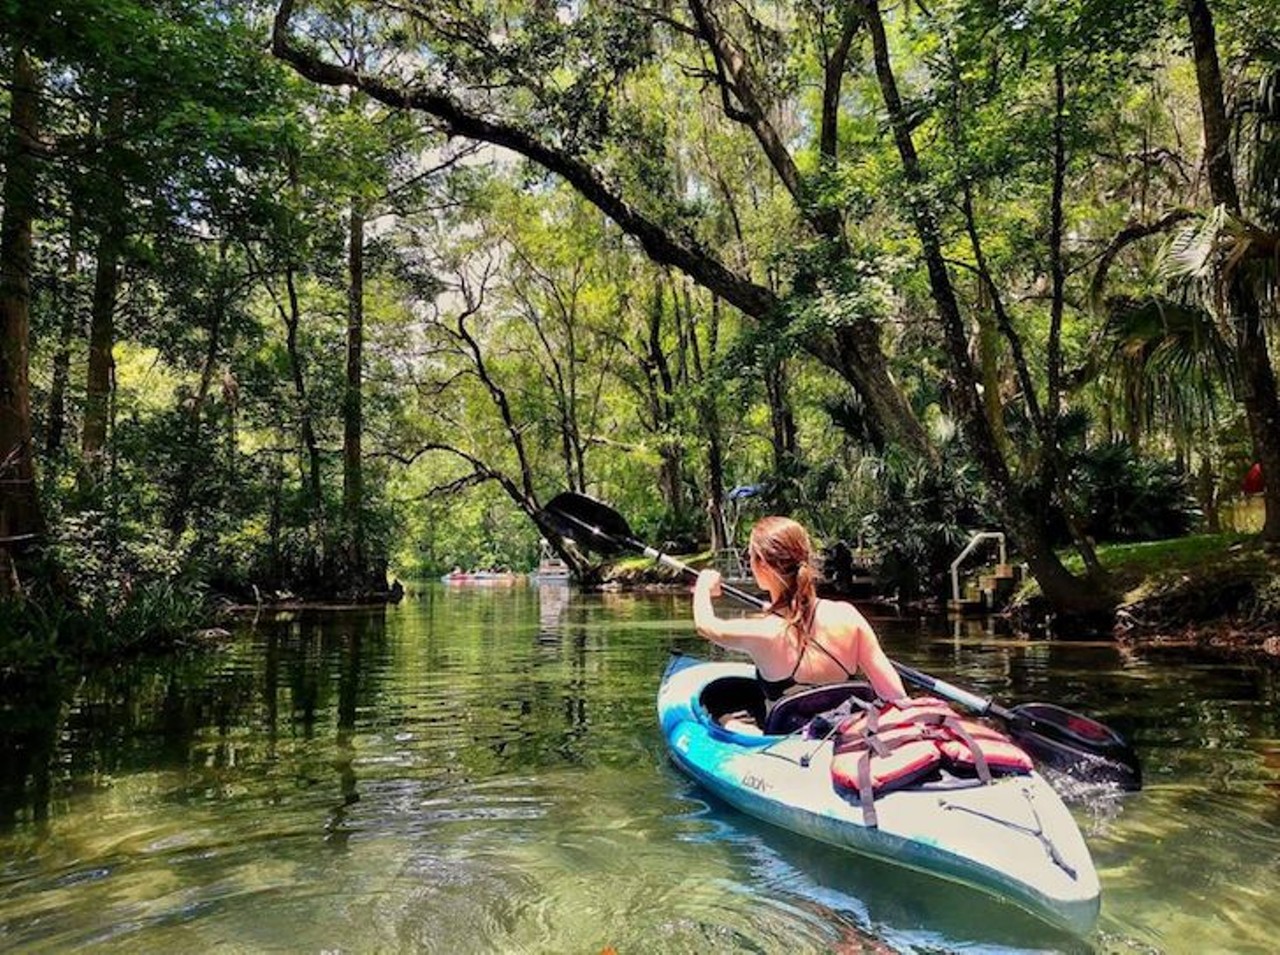 Rainbow Springs
Place to rent: Rainbow River Canoe & Kayak 
352-489-7854, 12121 River View, Dunnellon
Estimated driving distance from Orlando: about 1 hour 30 minutes
Take a clear view into the wild, aquatic world inhabiting the crystal clear waters of the Rainbow River. Starting at the intersection of Lake Rousseau, the Rainbow River and the Withlacoochee River, a 2-3 hour trek will take you 4.5 miles North East to K.P. Hole Float, a county park known for boating, snorkeling and kayaking. Renting a single kayak for this trip costs $33 and a tandem kayak or canoe costs $44.
Photo via bjcashh/Instagram